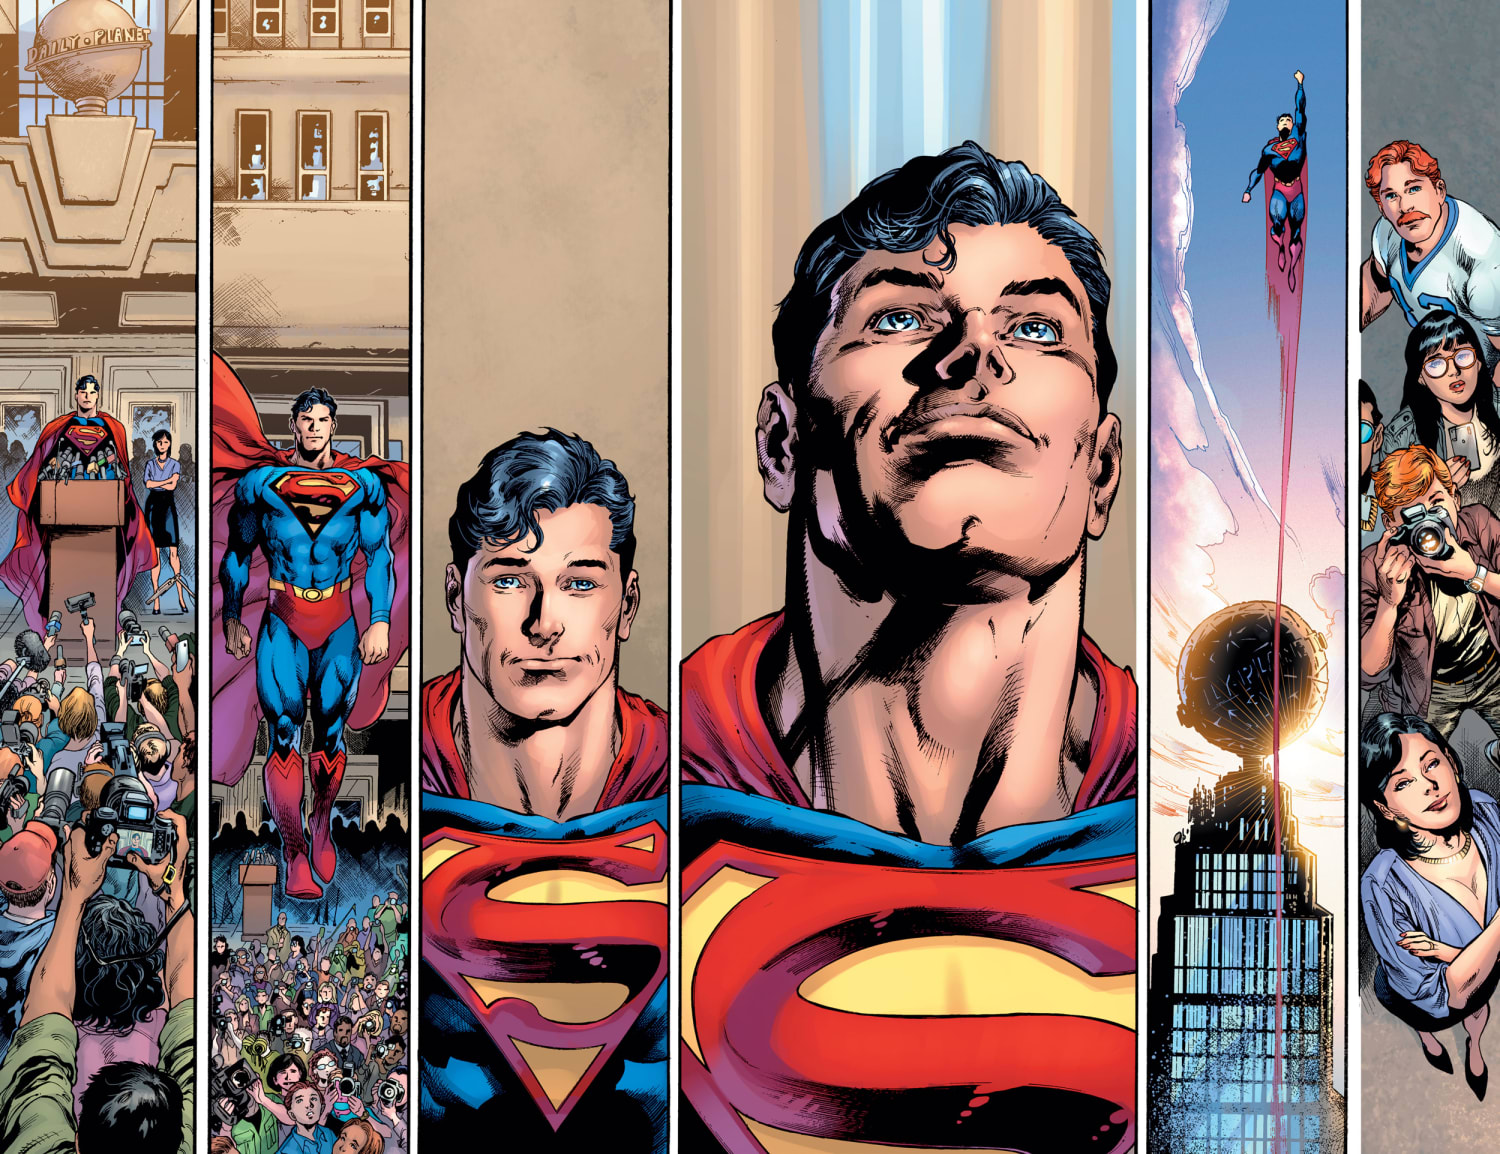 Superman S Comic Book Reveal Proves Anonymity Is Impossible Even In Fiction